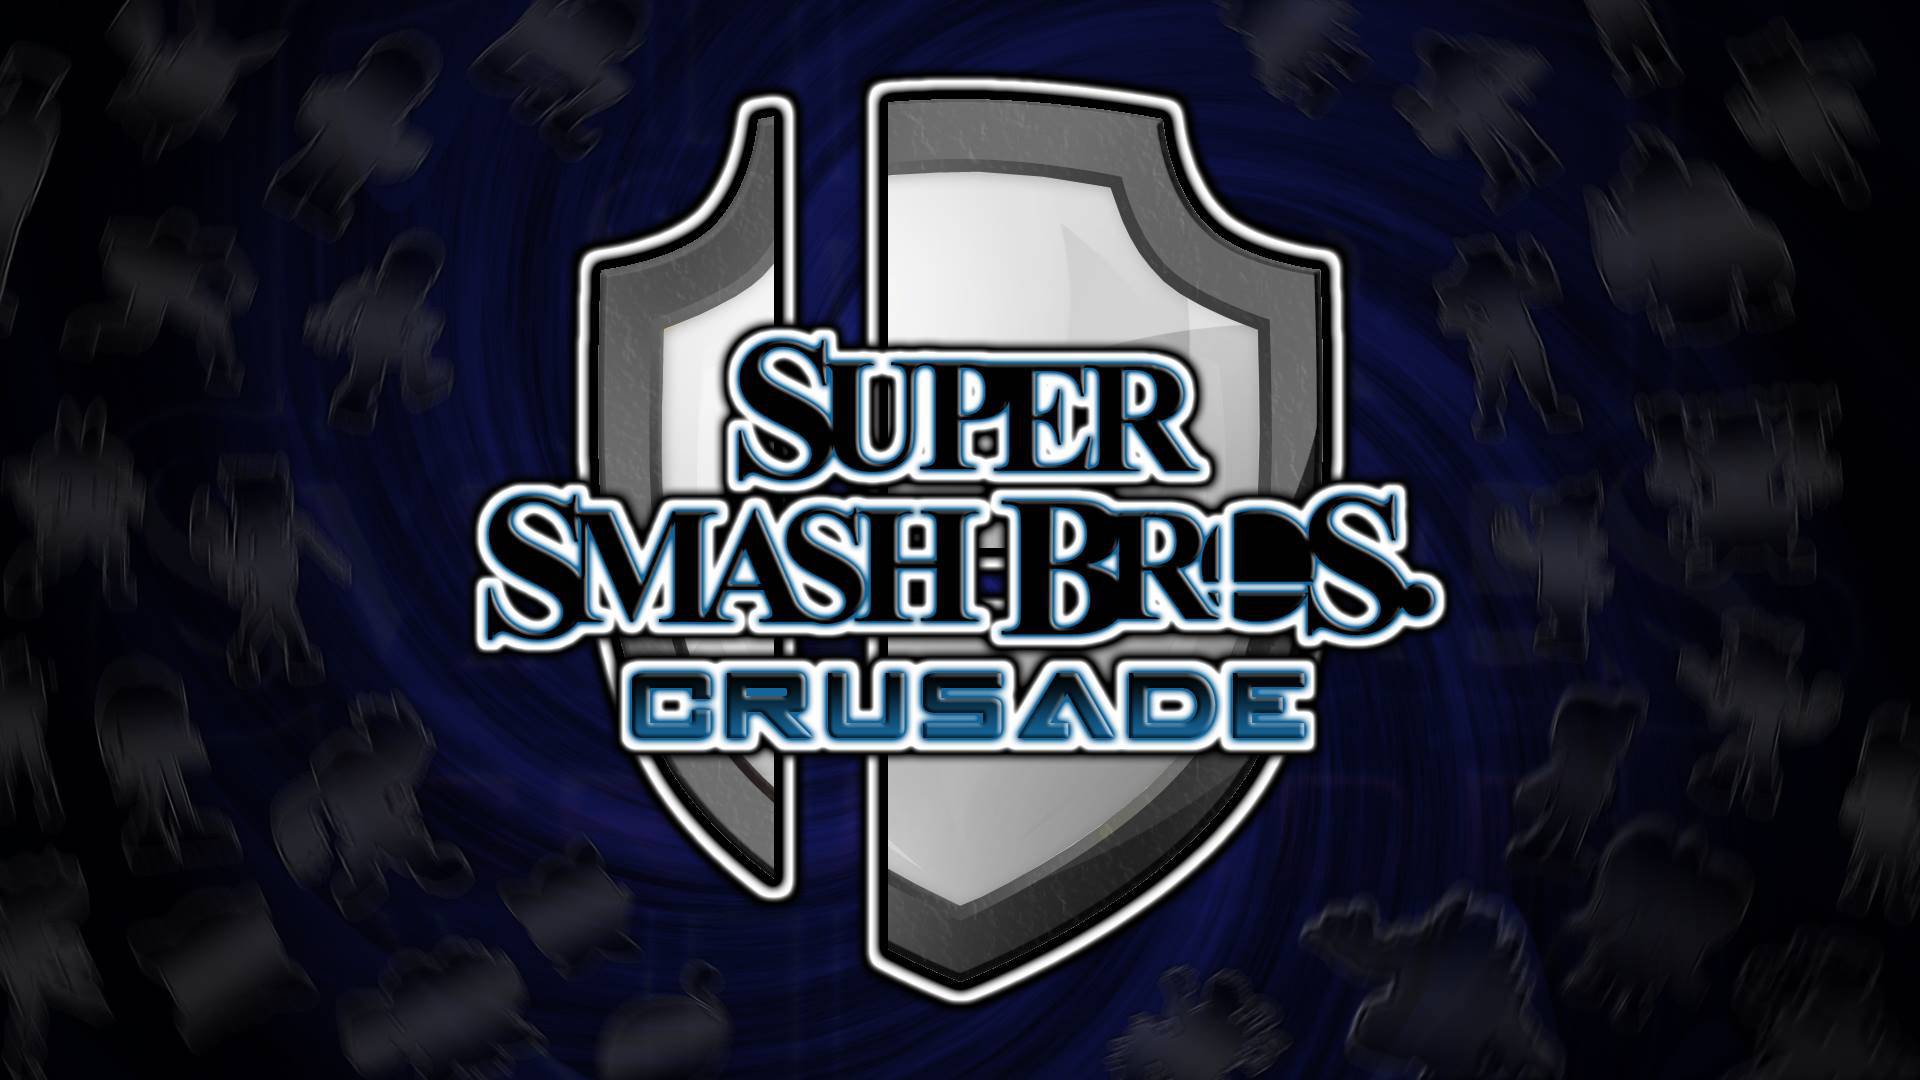 Super Smash Bros Crusade for Windows - Download it from Uptodown for free